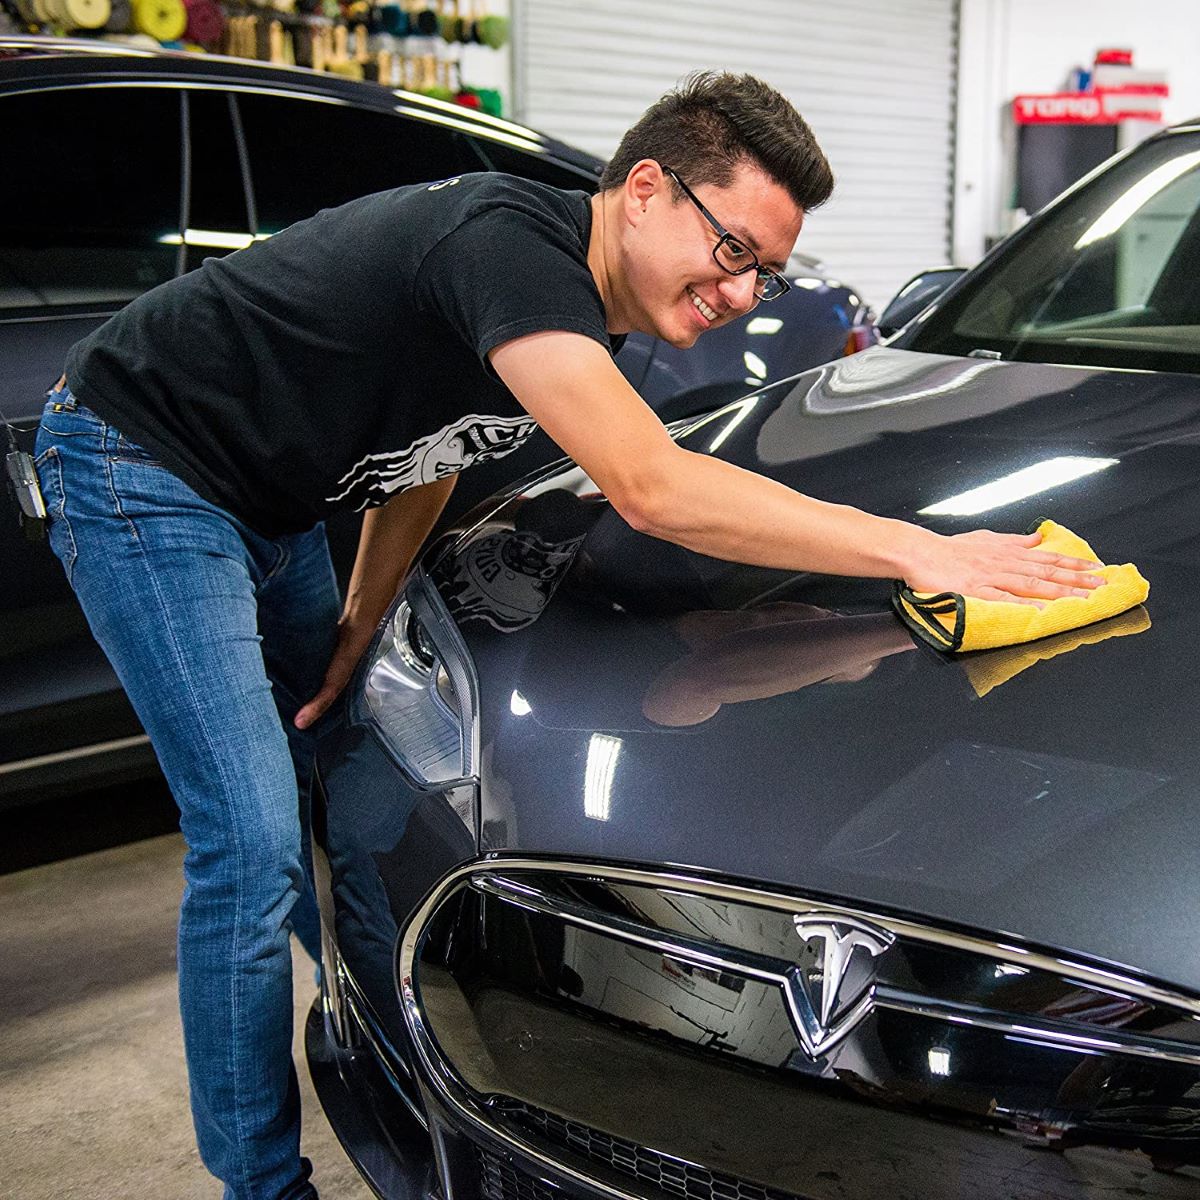 A man in jeans, a black t-shirt and glasses leans over a car with one of the best car care accessories: the simple microfiber cloth